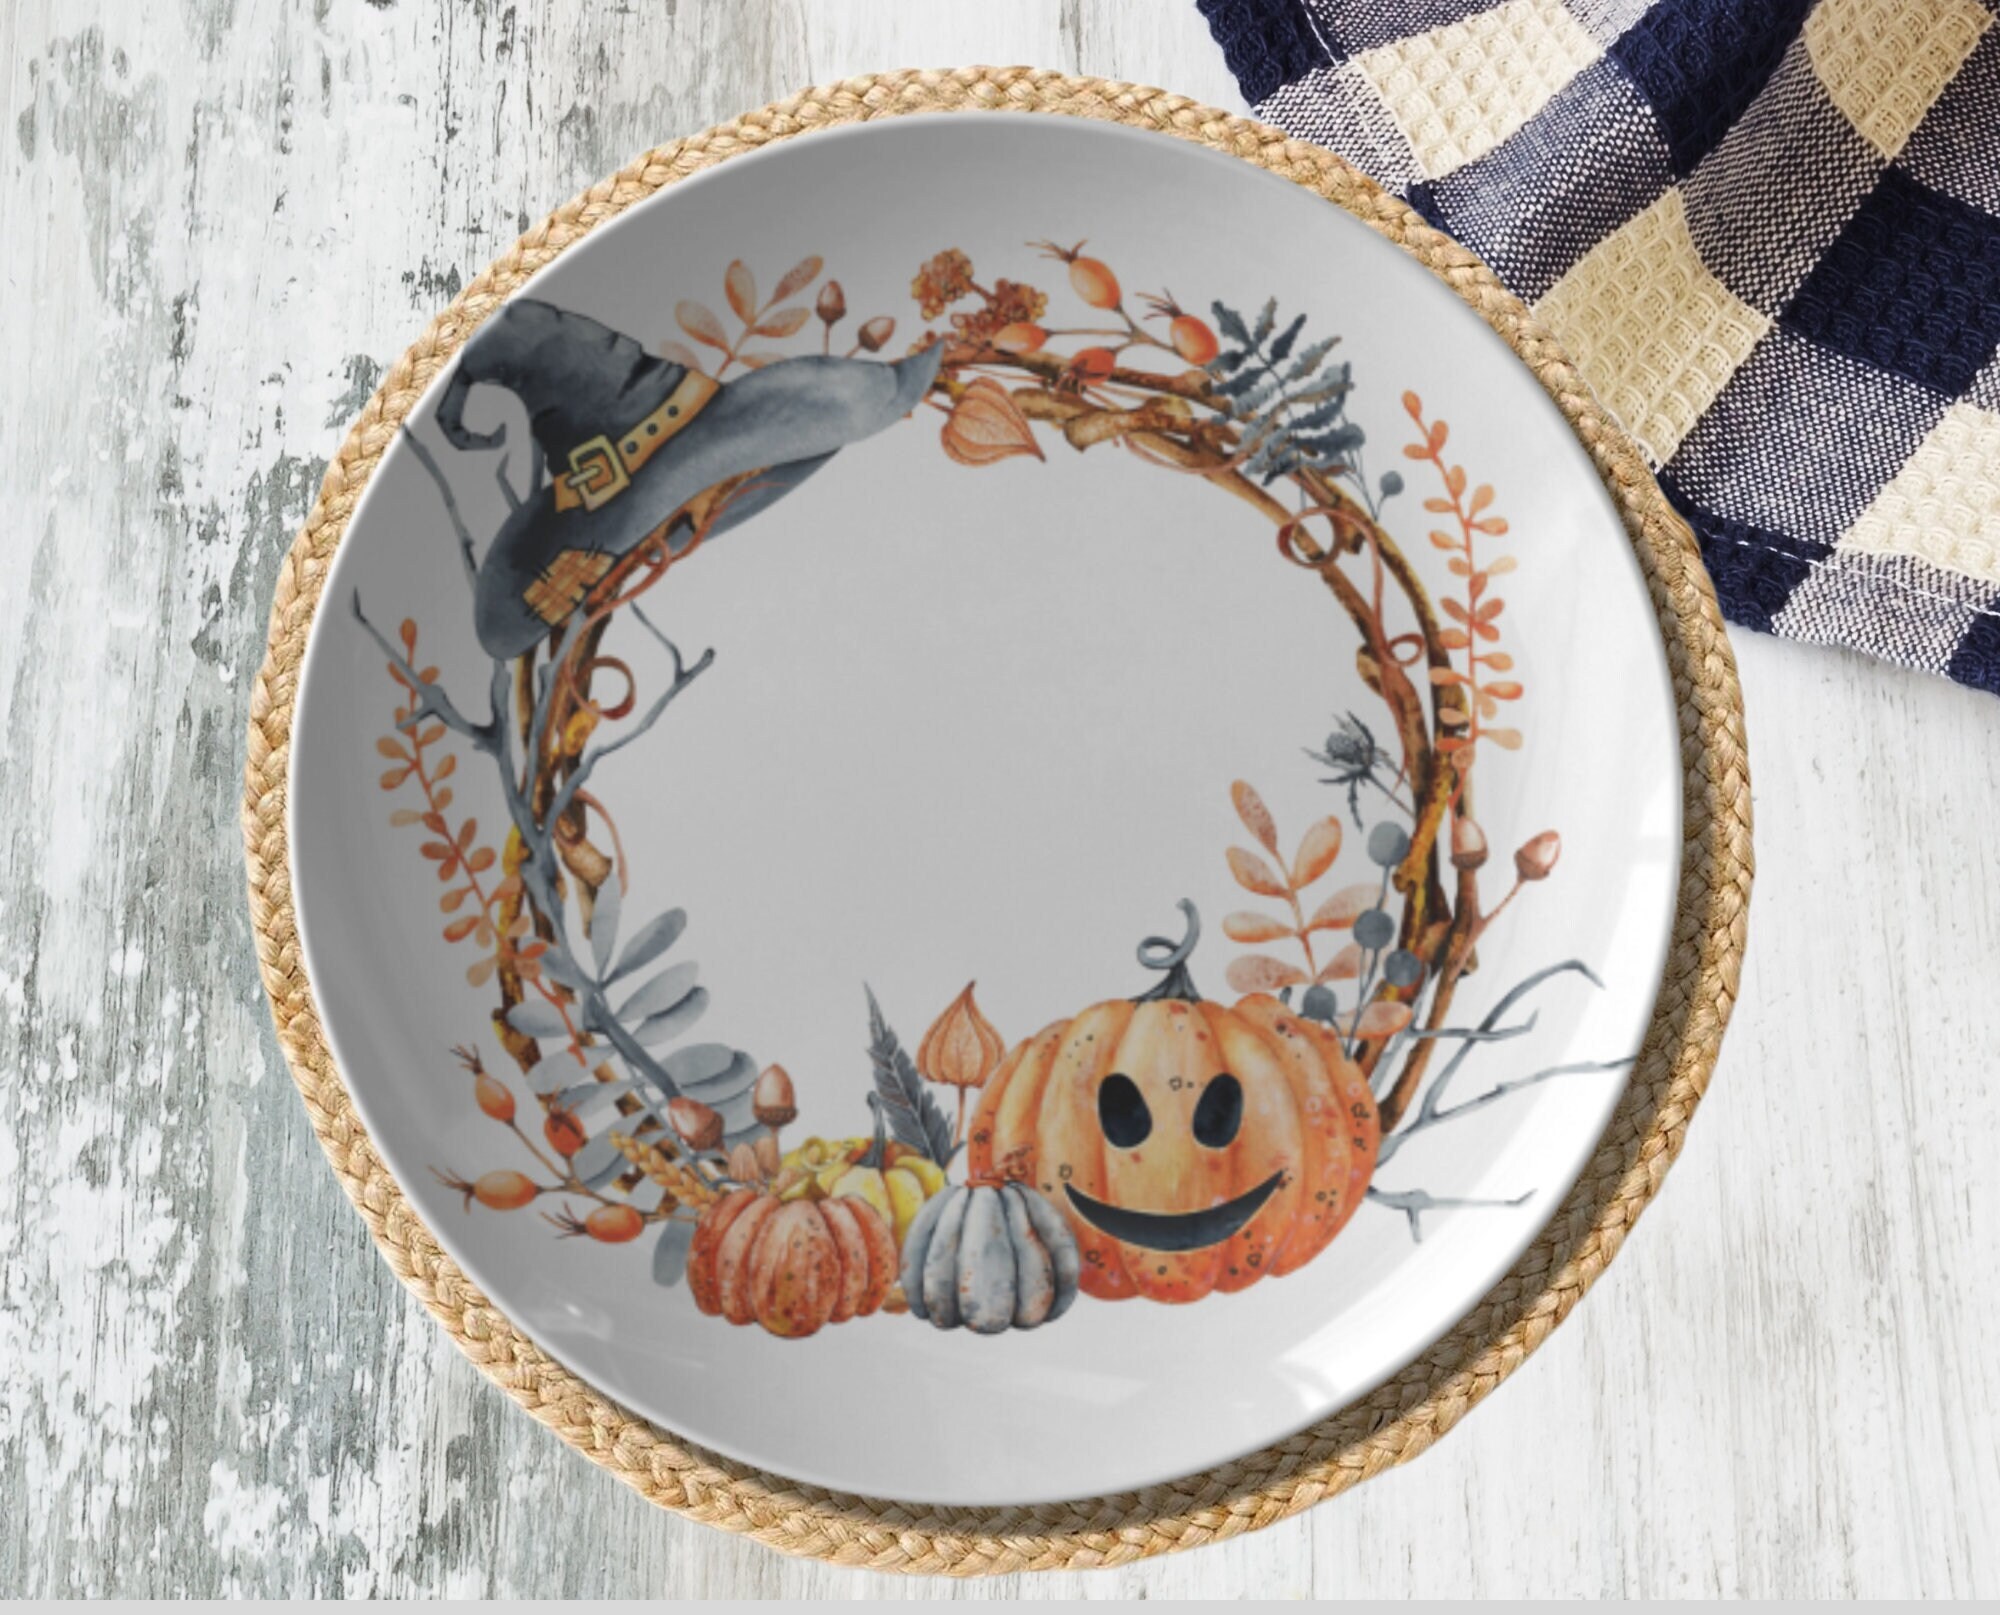 Snoopy Pottery Barn peanuts Halloween pumpkin plate cup lunch holiday gift  set